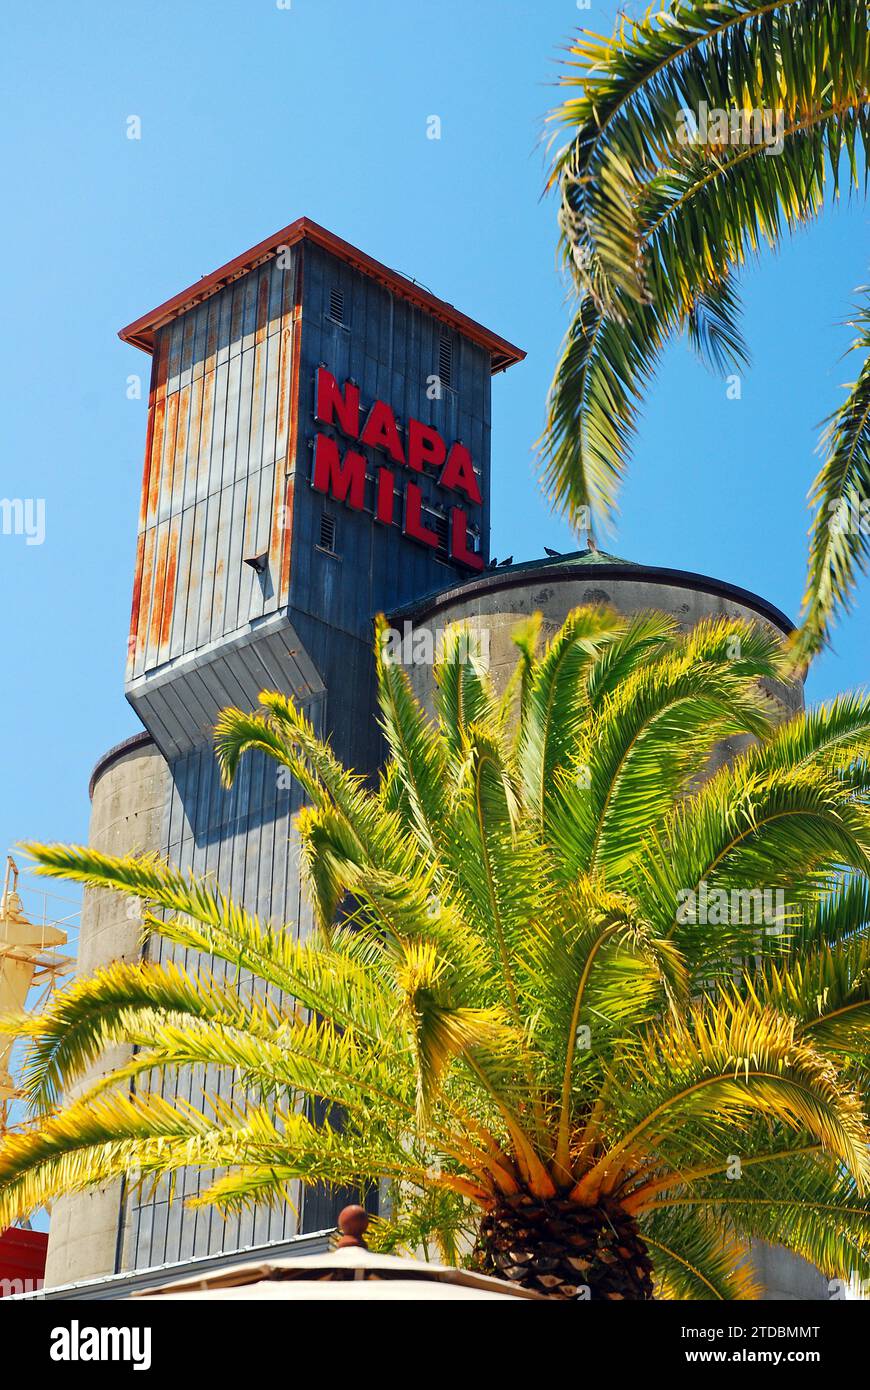 The historic Mill now a restaurant and cafe in Napa, California is framed by palm trees Stock Photo